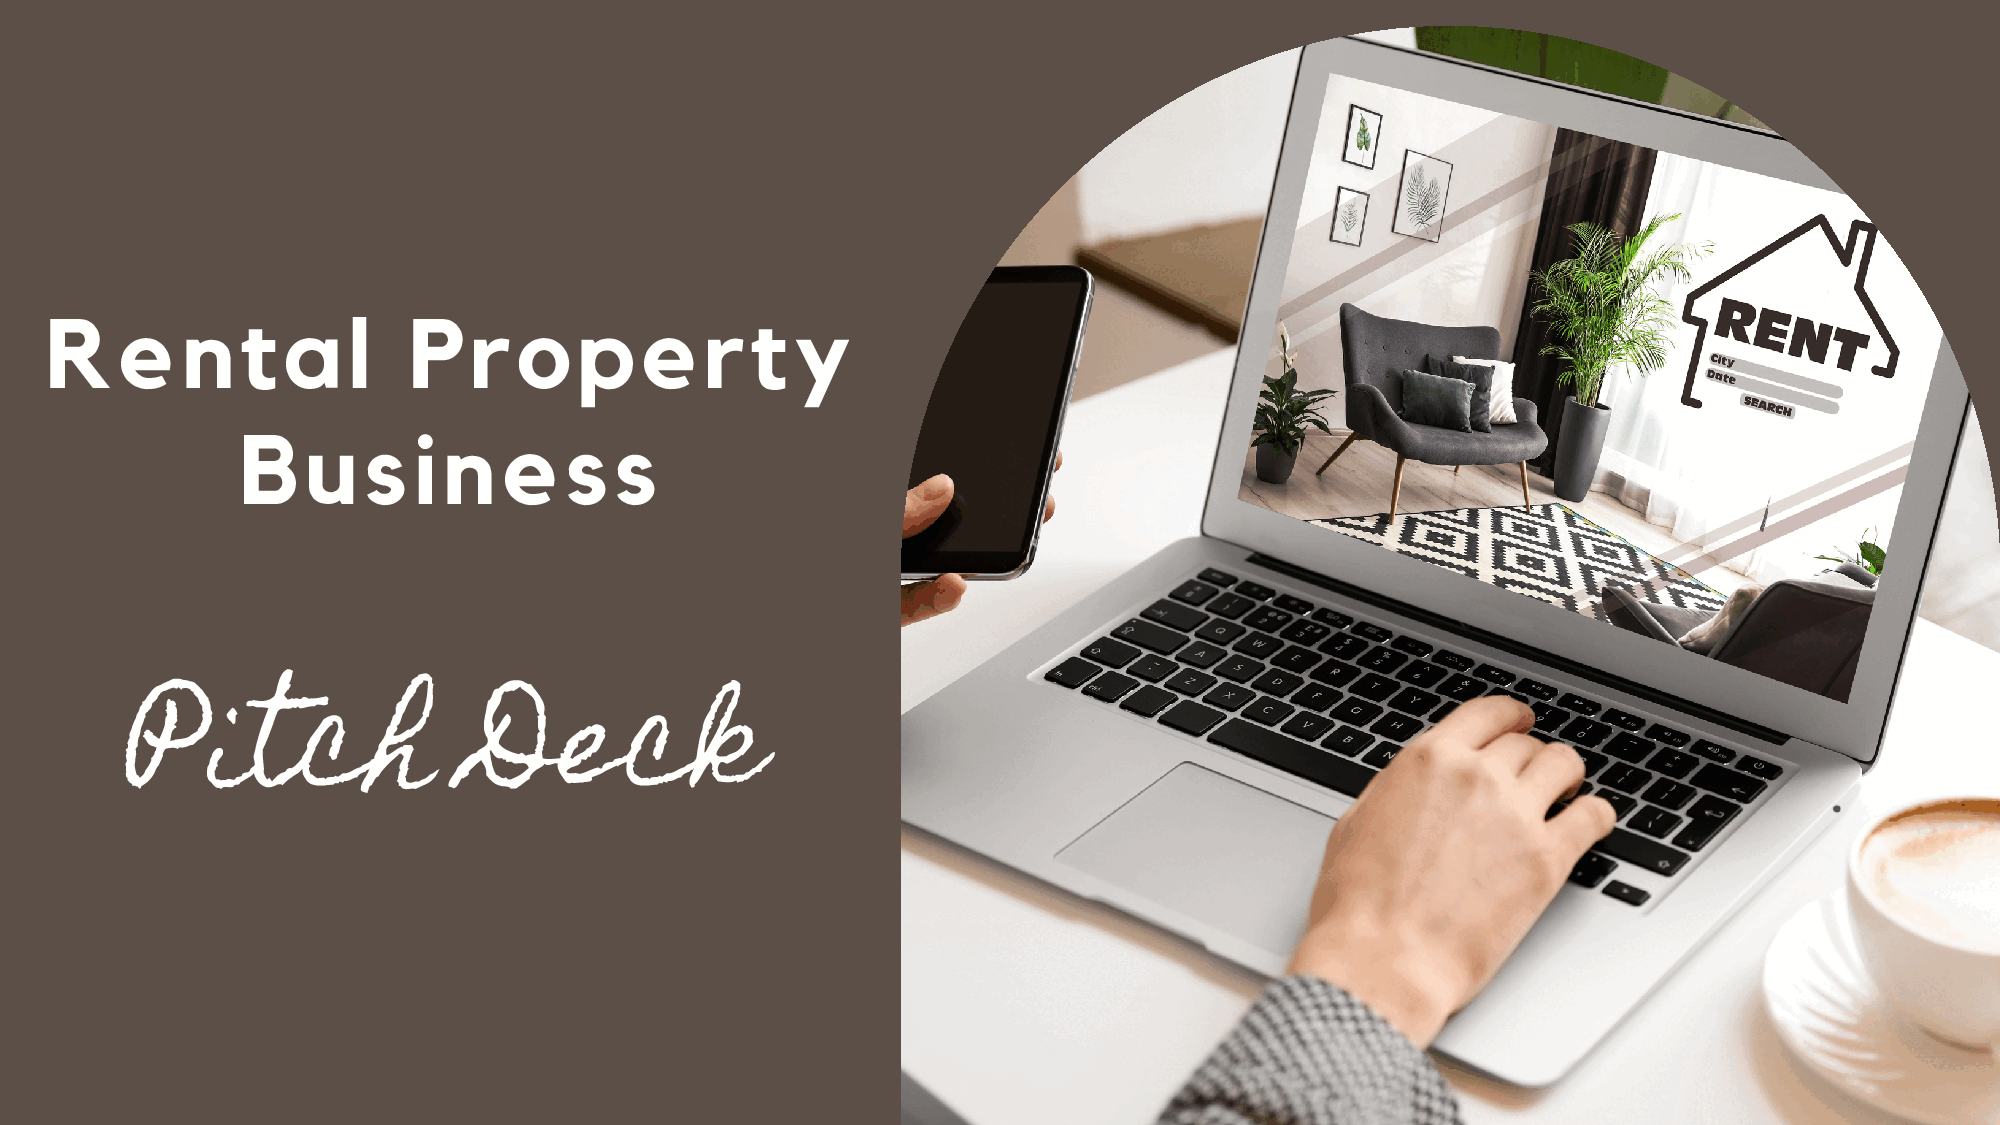 Rental Property Business Pitch Deck Template